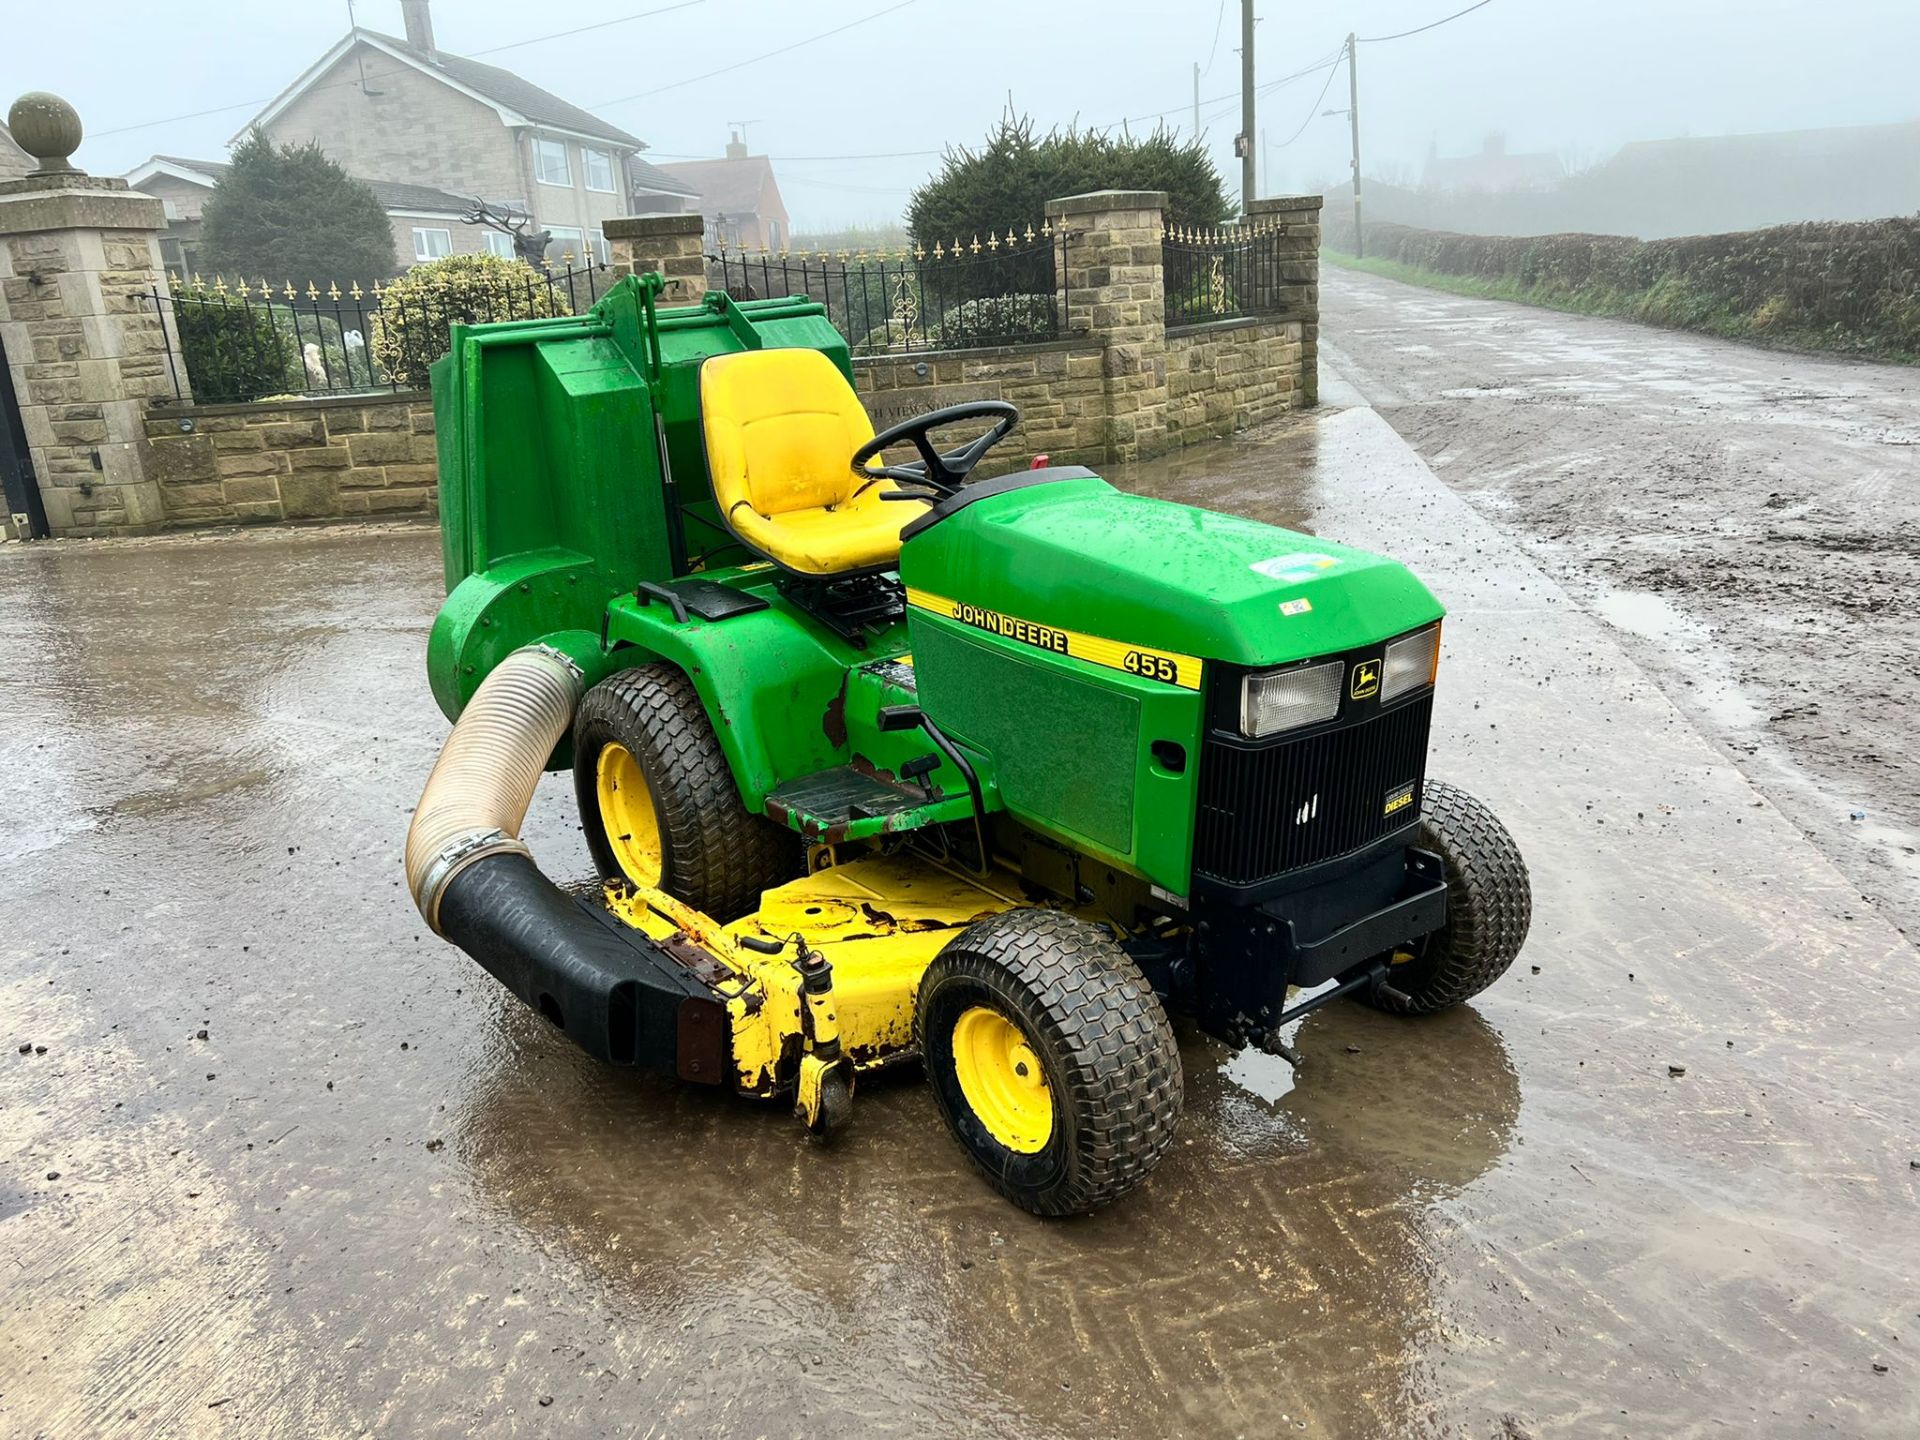 JOHN DEERE 455 22hp DIESEL RIDE ON MOWER WITH CLAMSHELL COLLECTOR, RUNS DRIVES AND CUTS *PLUS VAT*